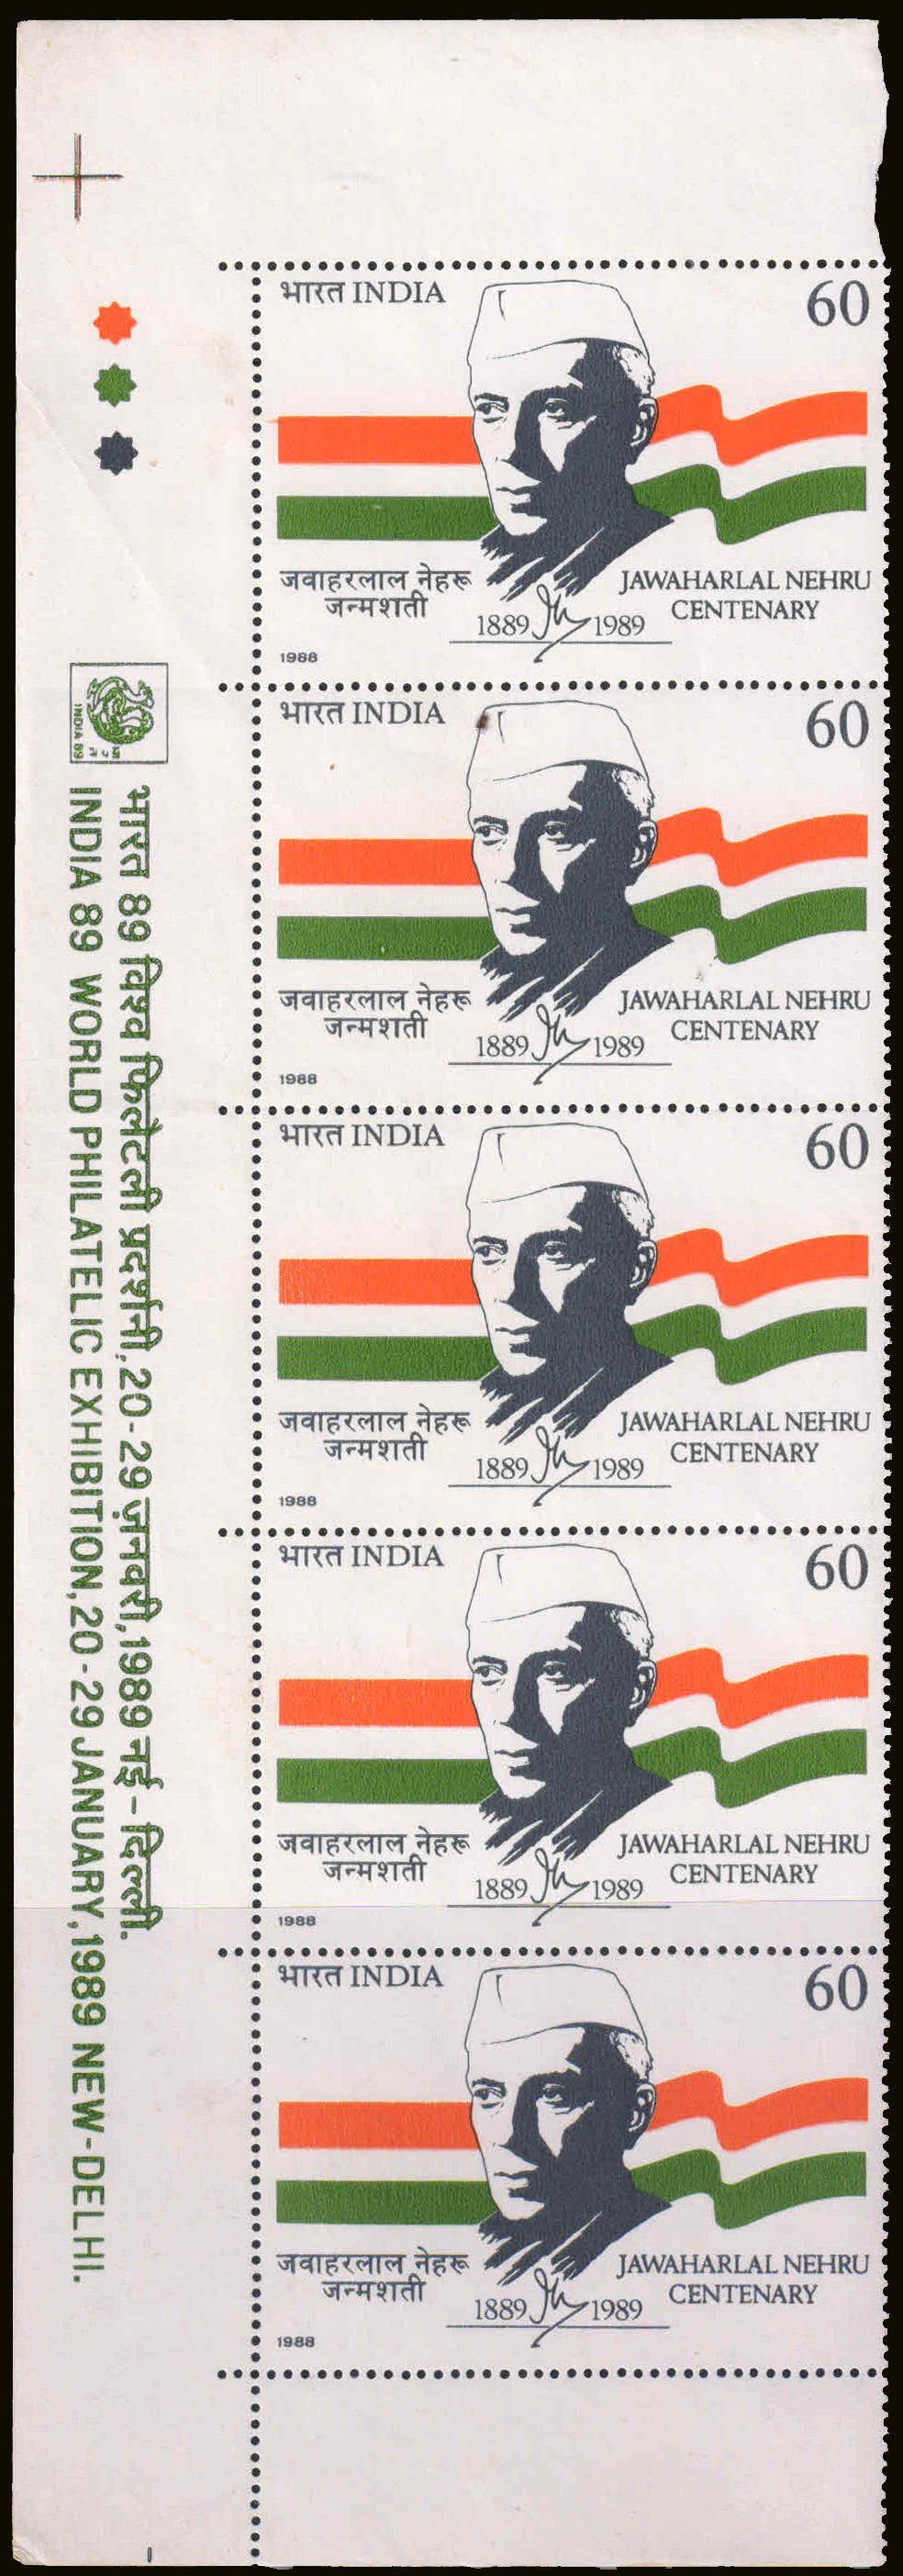 INDIA 1988-Jawahar Lal Nehru, 60 P. Vertical Strip of 5 with T.L. MNH, as per scan